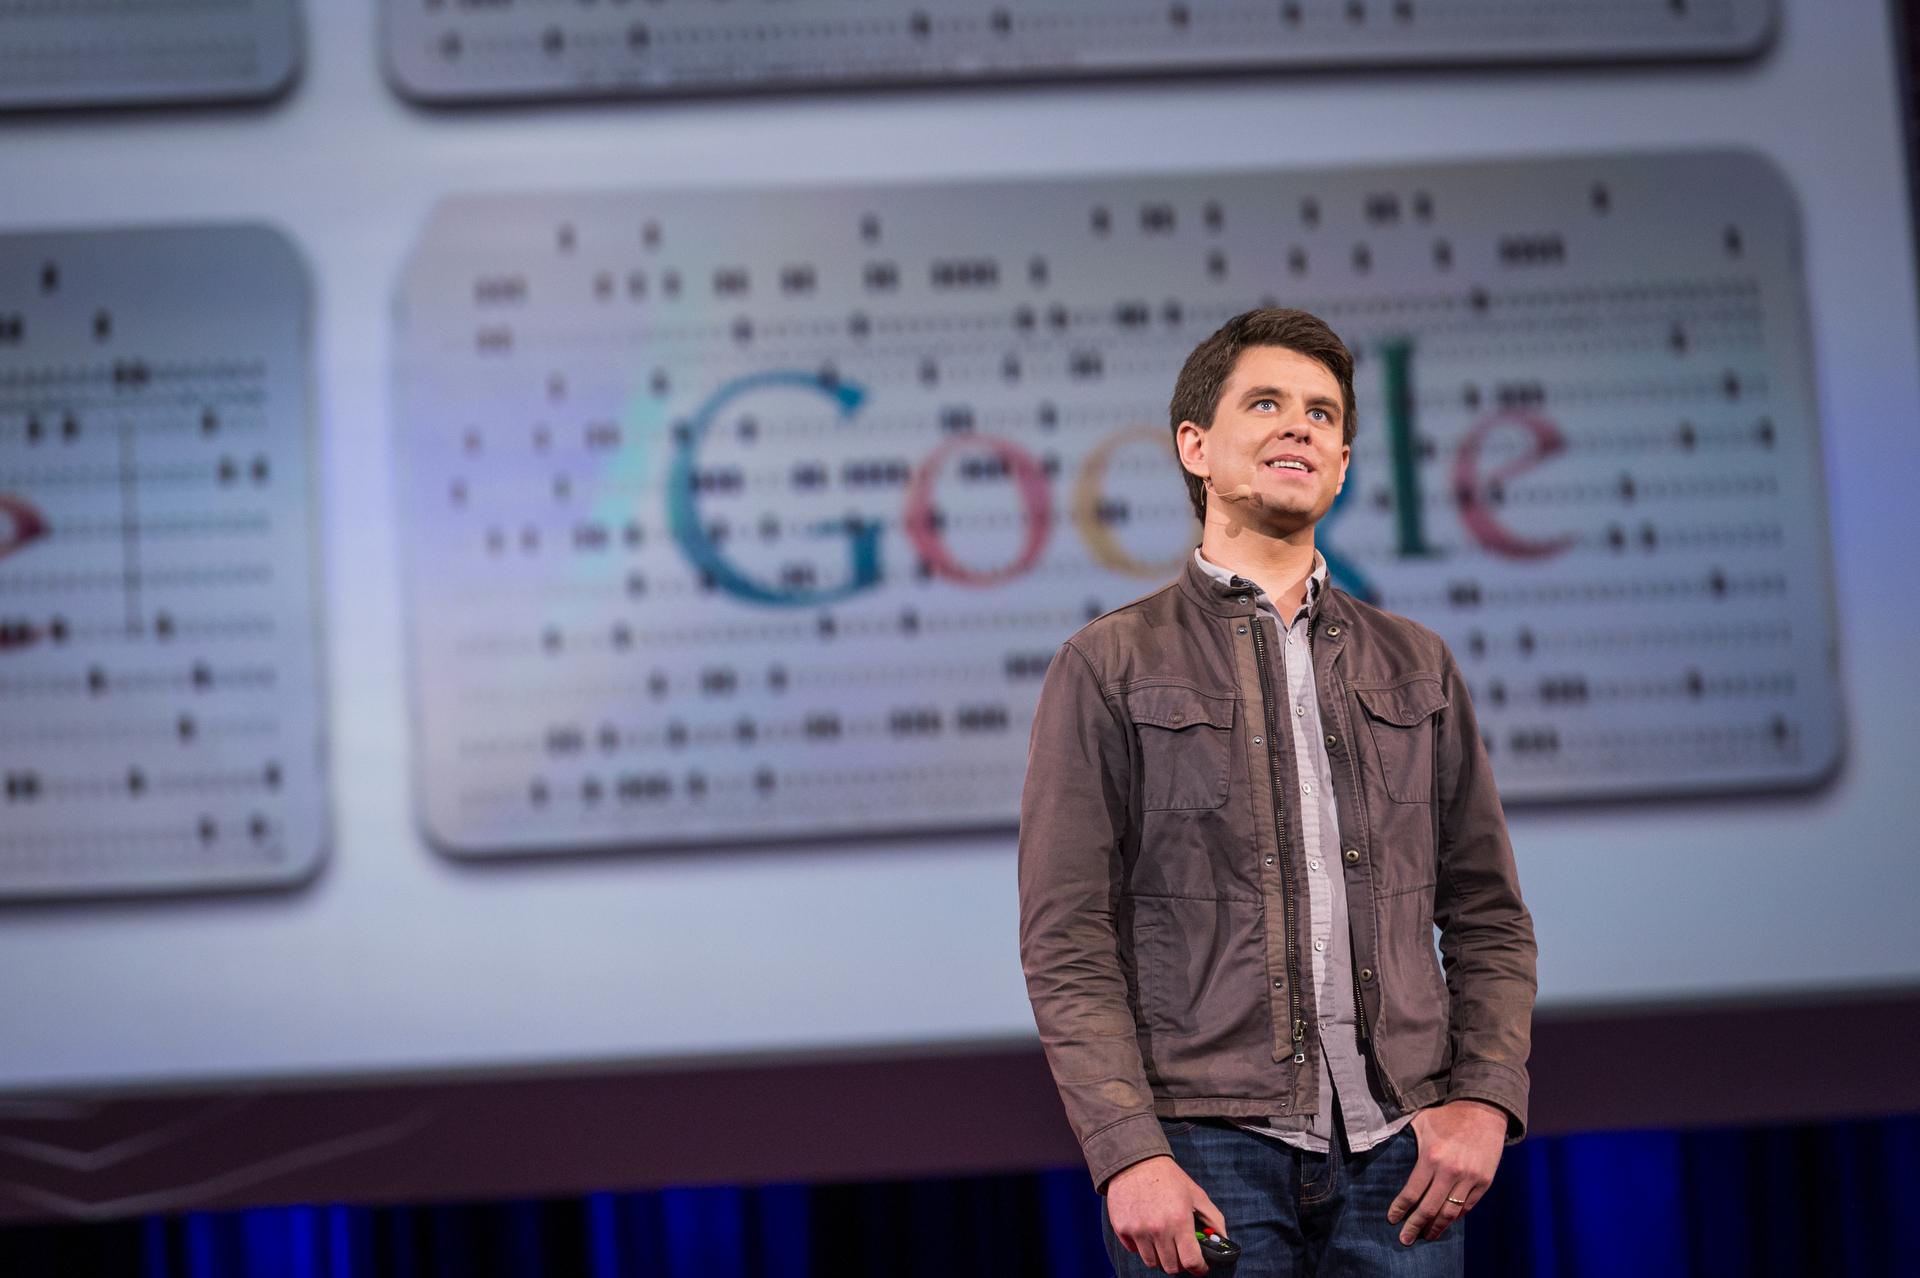 Using serious math to answer weird questions: Randall Munroe at
TED2014